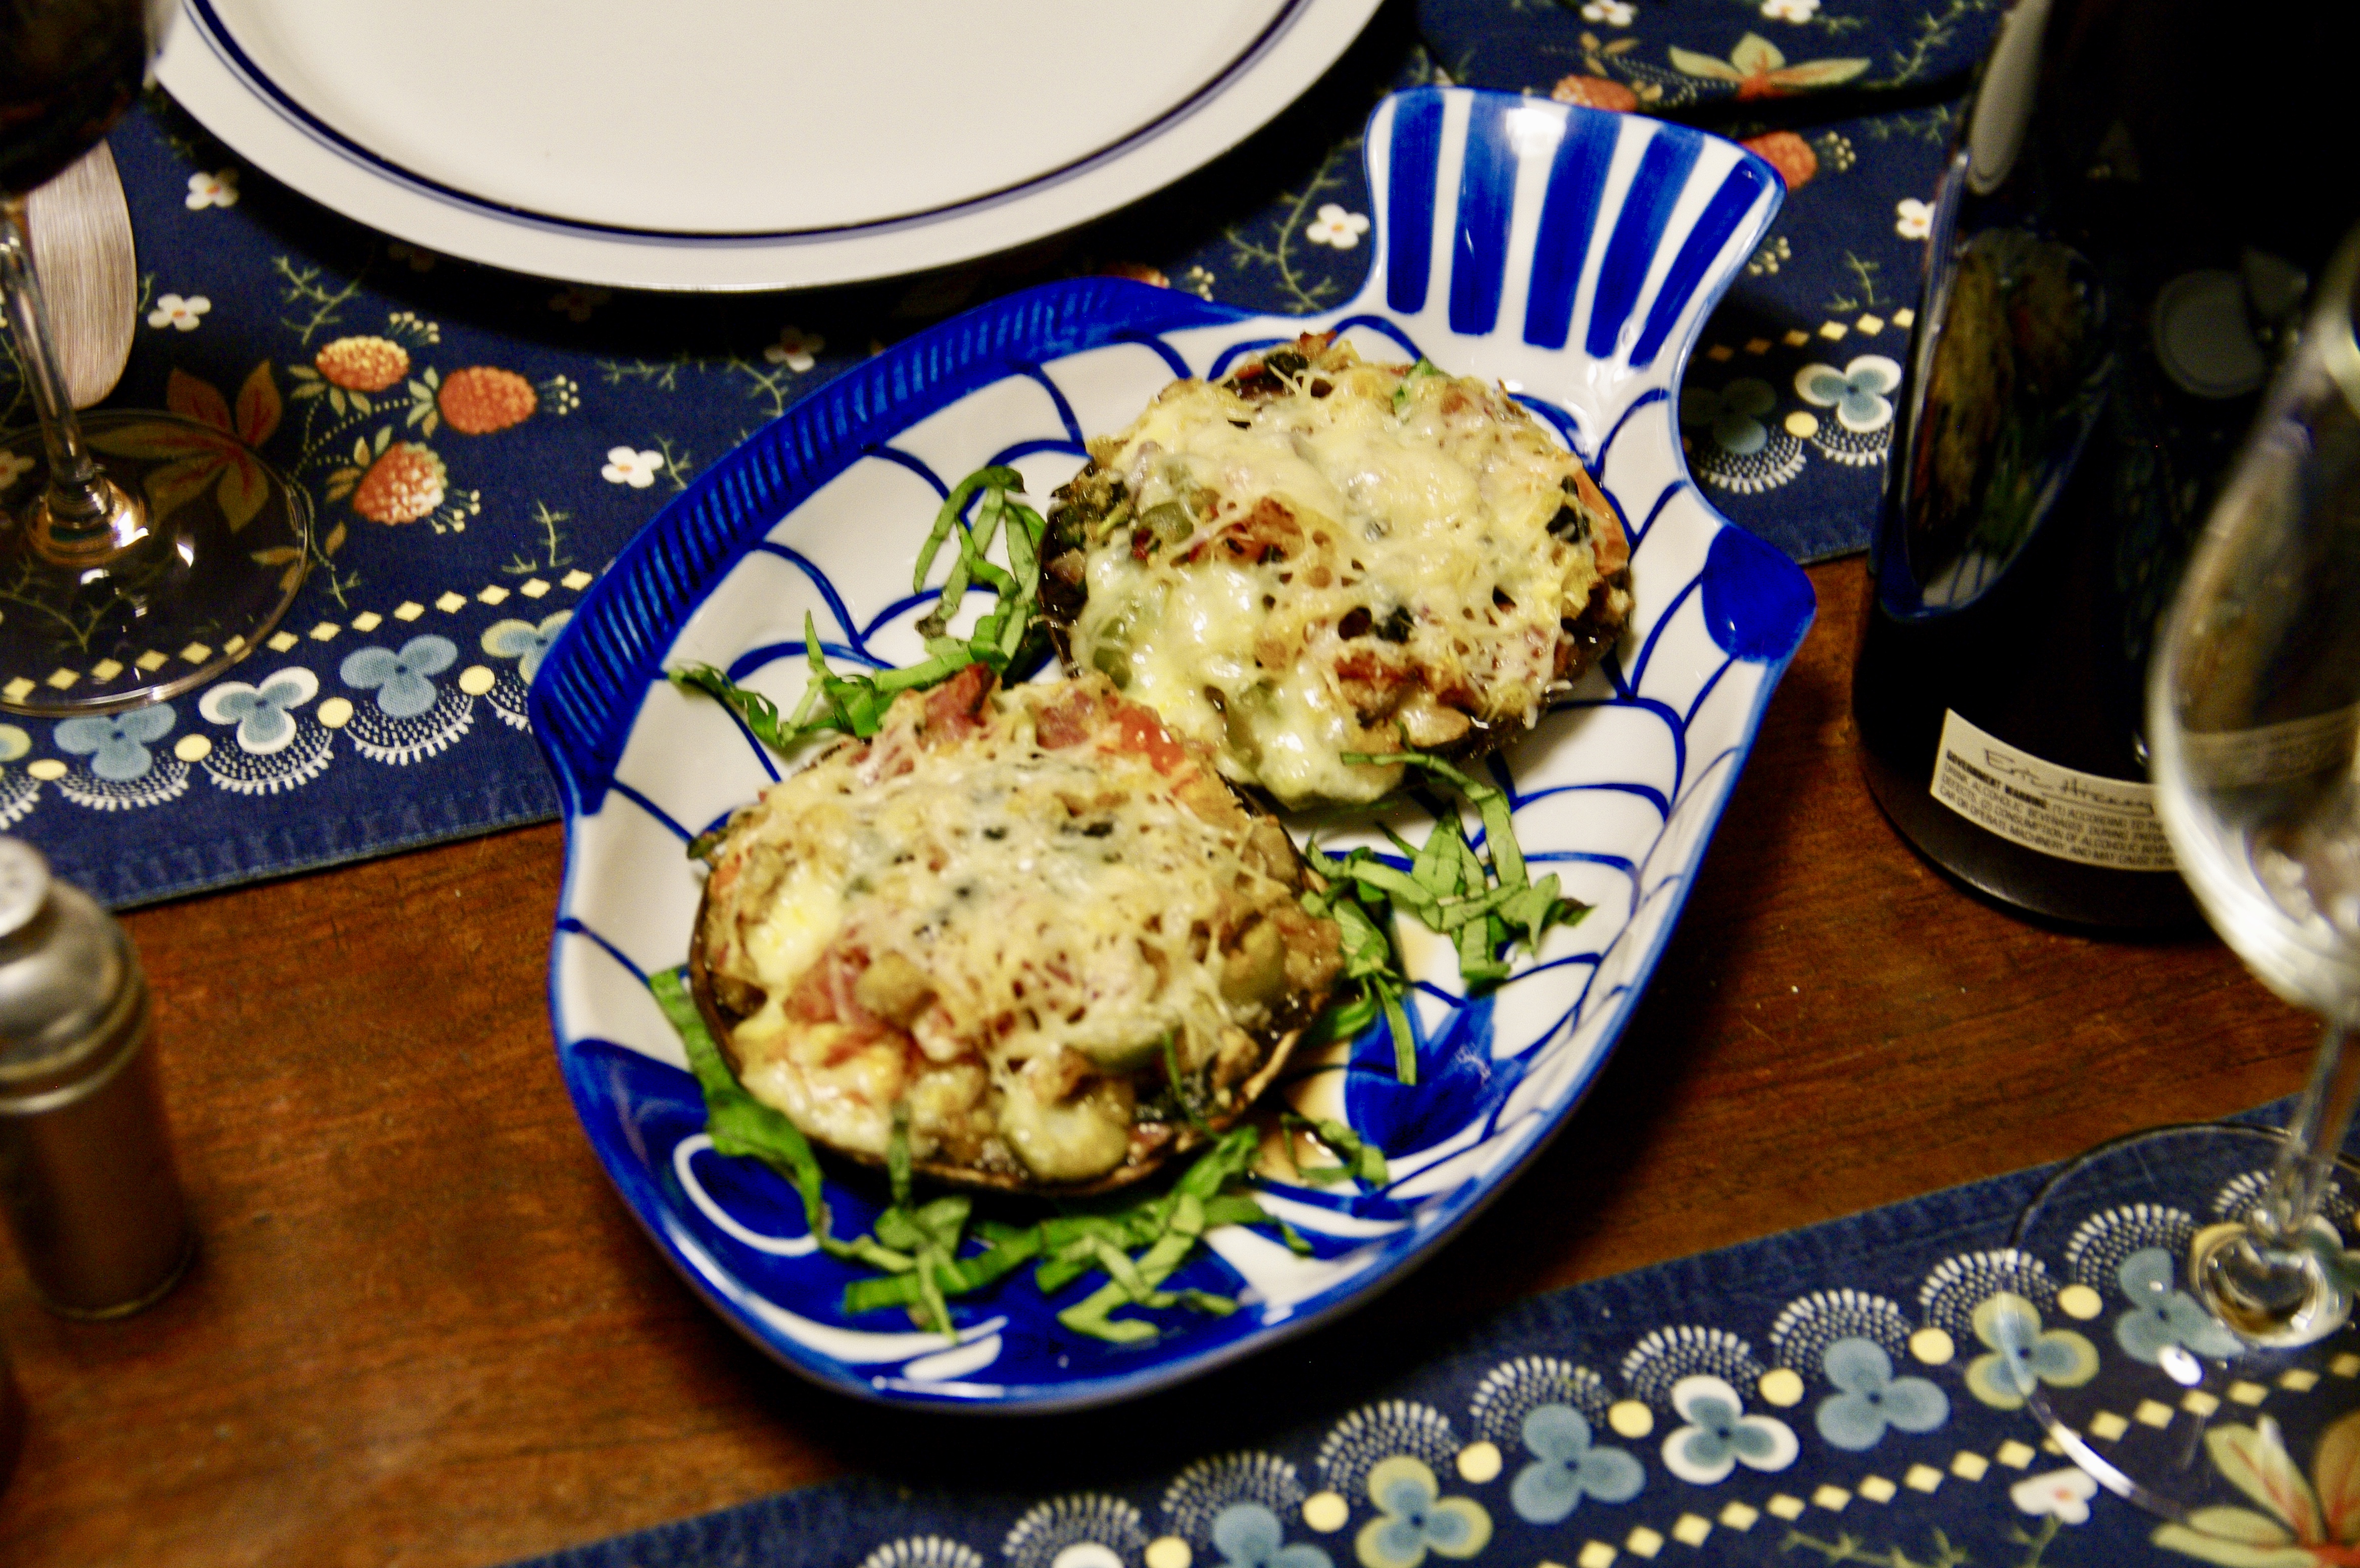 Stuffed portobello mushrooms take center stage for a light supper or luncheon with friends.